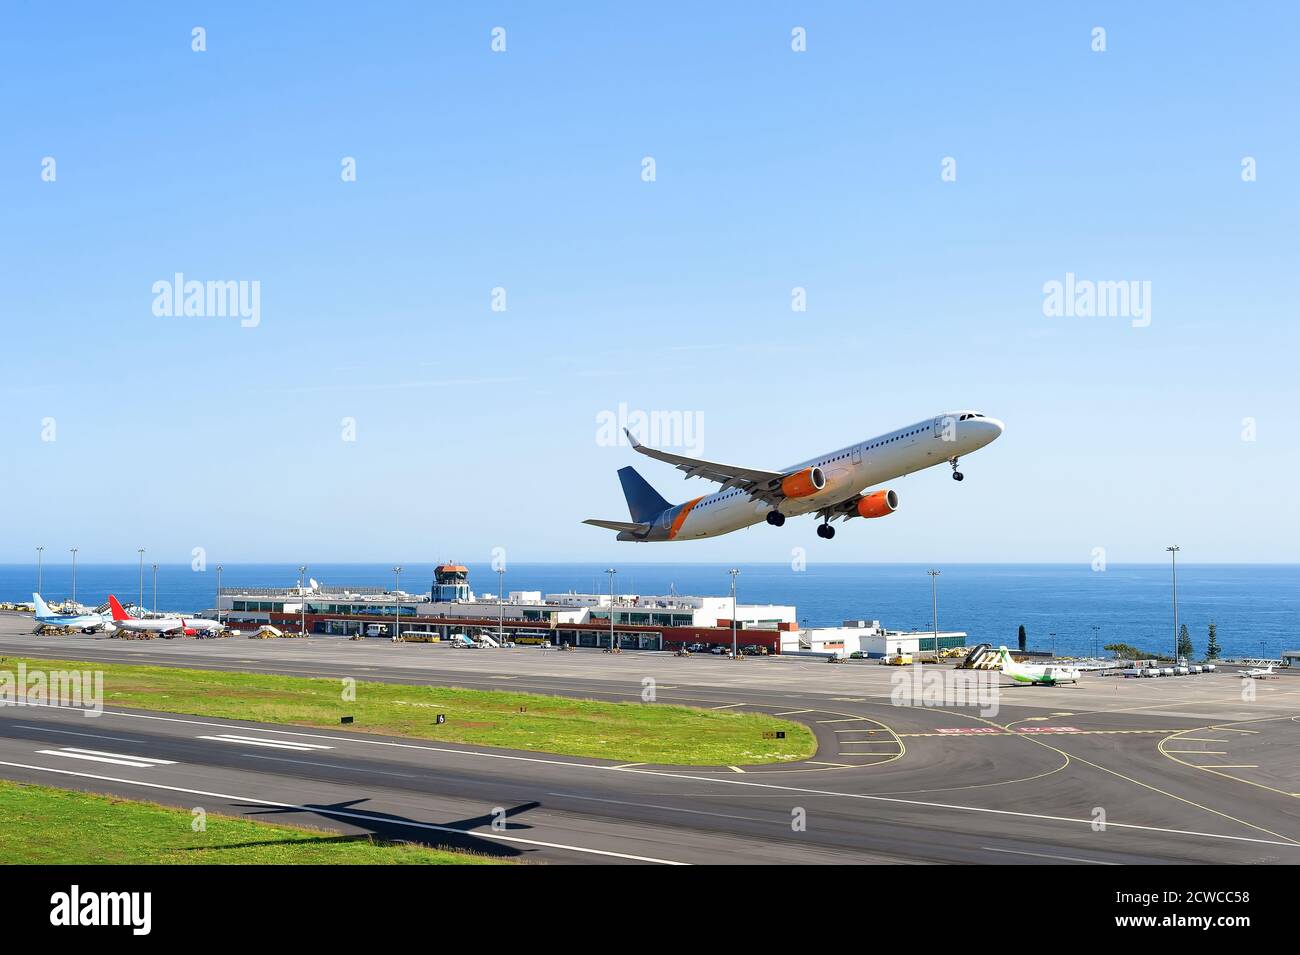 Airplane taking-off, runway of International Funchal airport terminal building, ocean in background, Madeira, Portugal Stock Photo